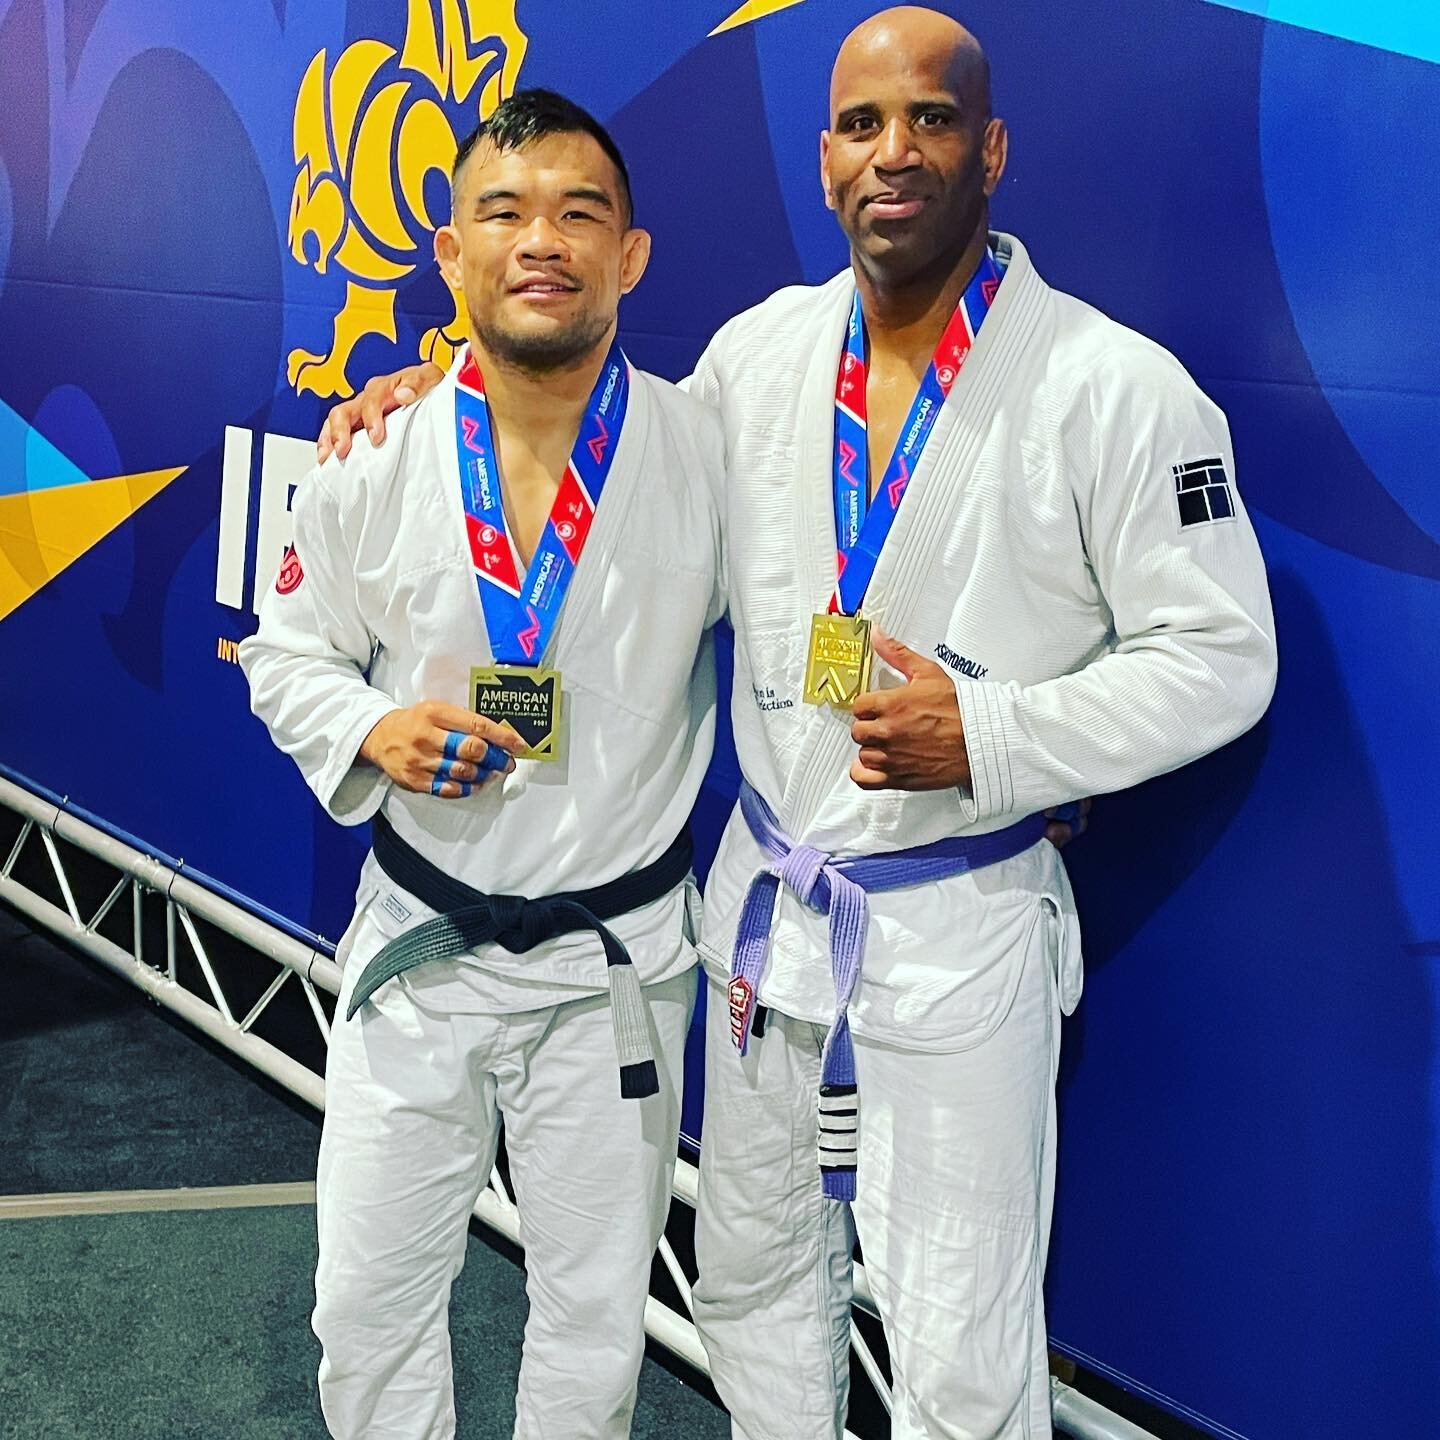 I took 🥉 today. Lost a painful decision in the semis. I respectfully disagreed with the refs decision but 💩 happens. Big Congratulations to my man Harvey for crushing his division and taking 🥇 !! He just keeps winning with inspiring performances. 